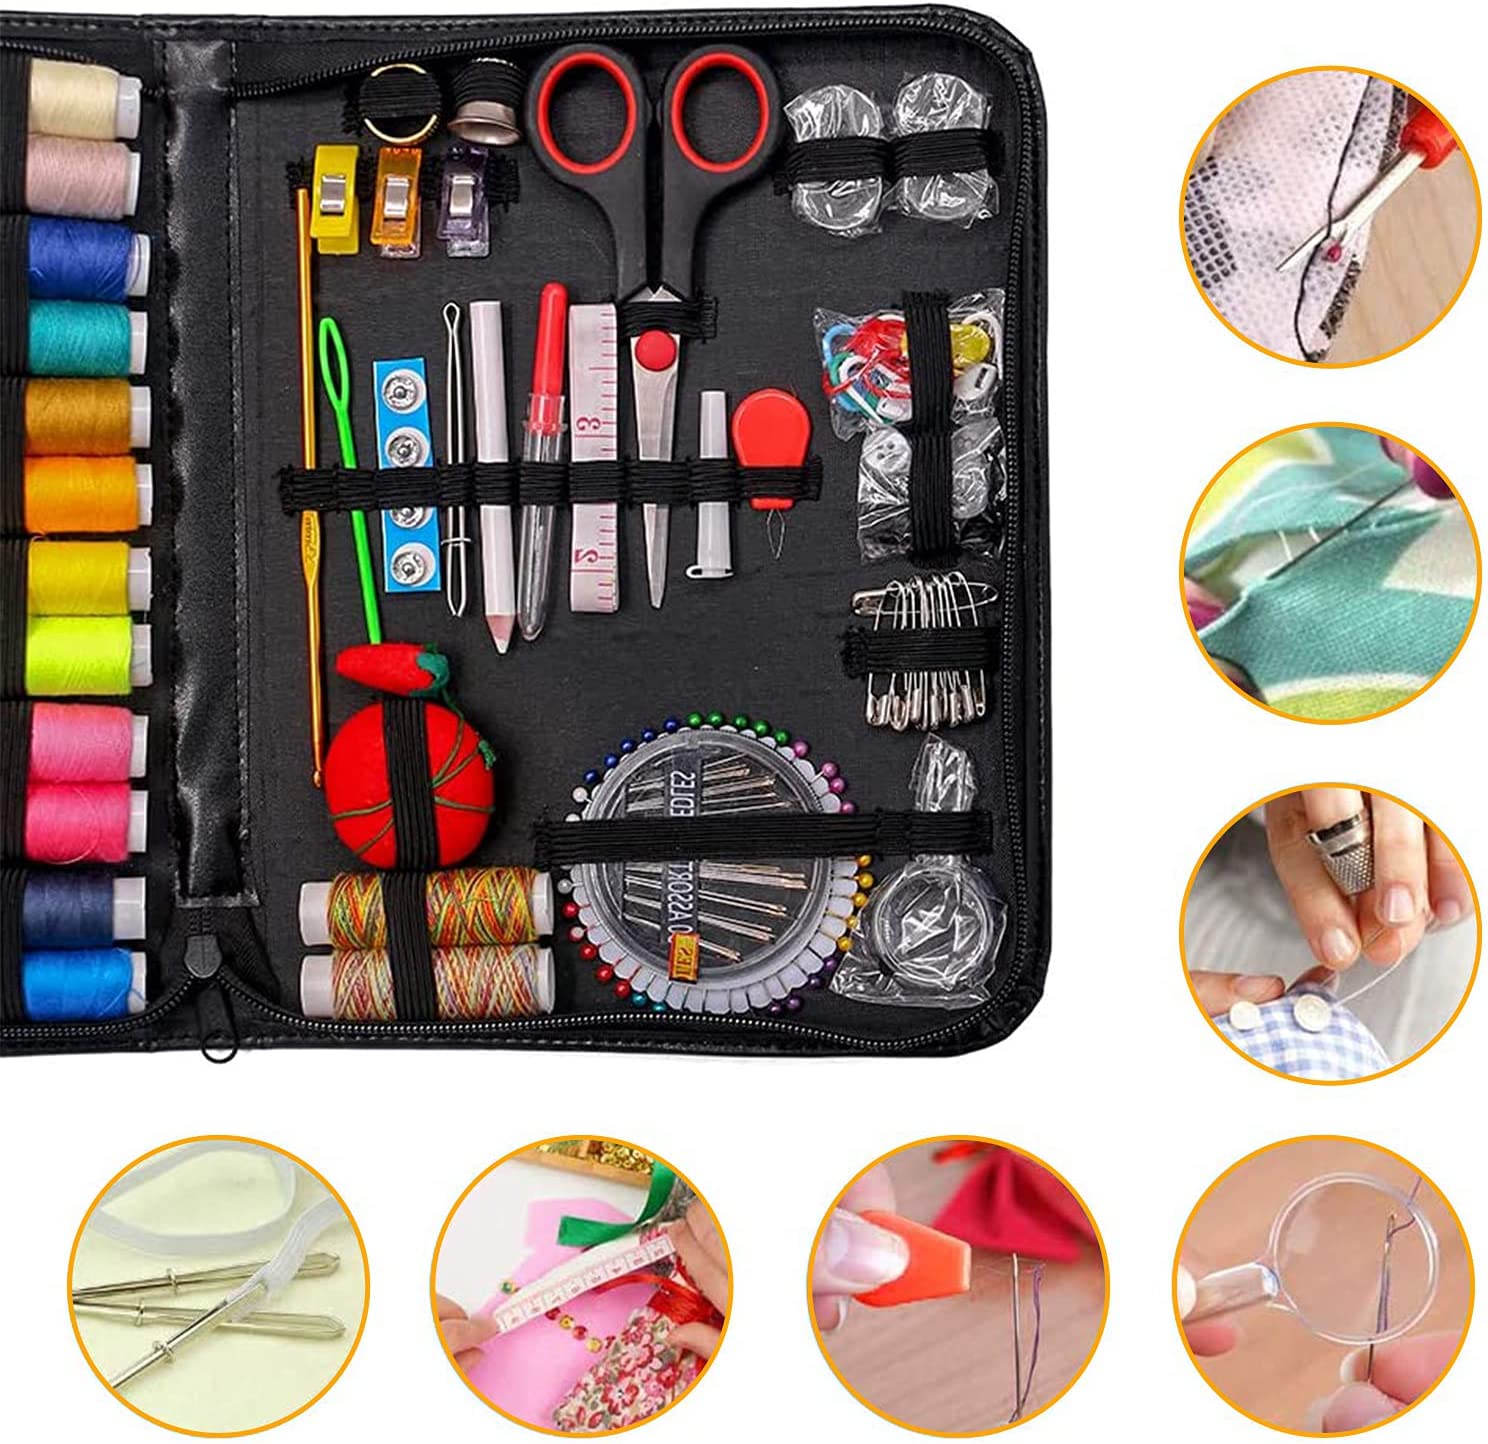 Sewing Kit Large Sewing Supplies Adults Sewing Kits for Beginners Emergency  KidsTravel Home with Needles Scissor Thimble Thread